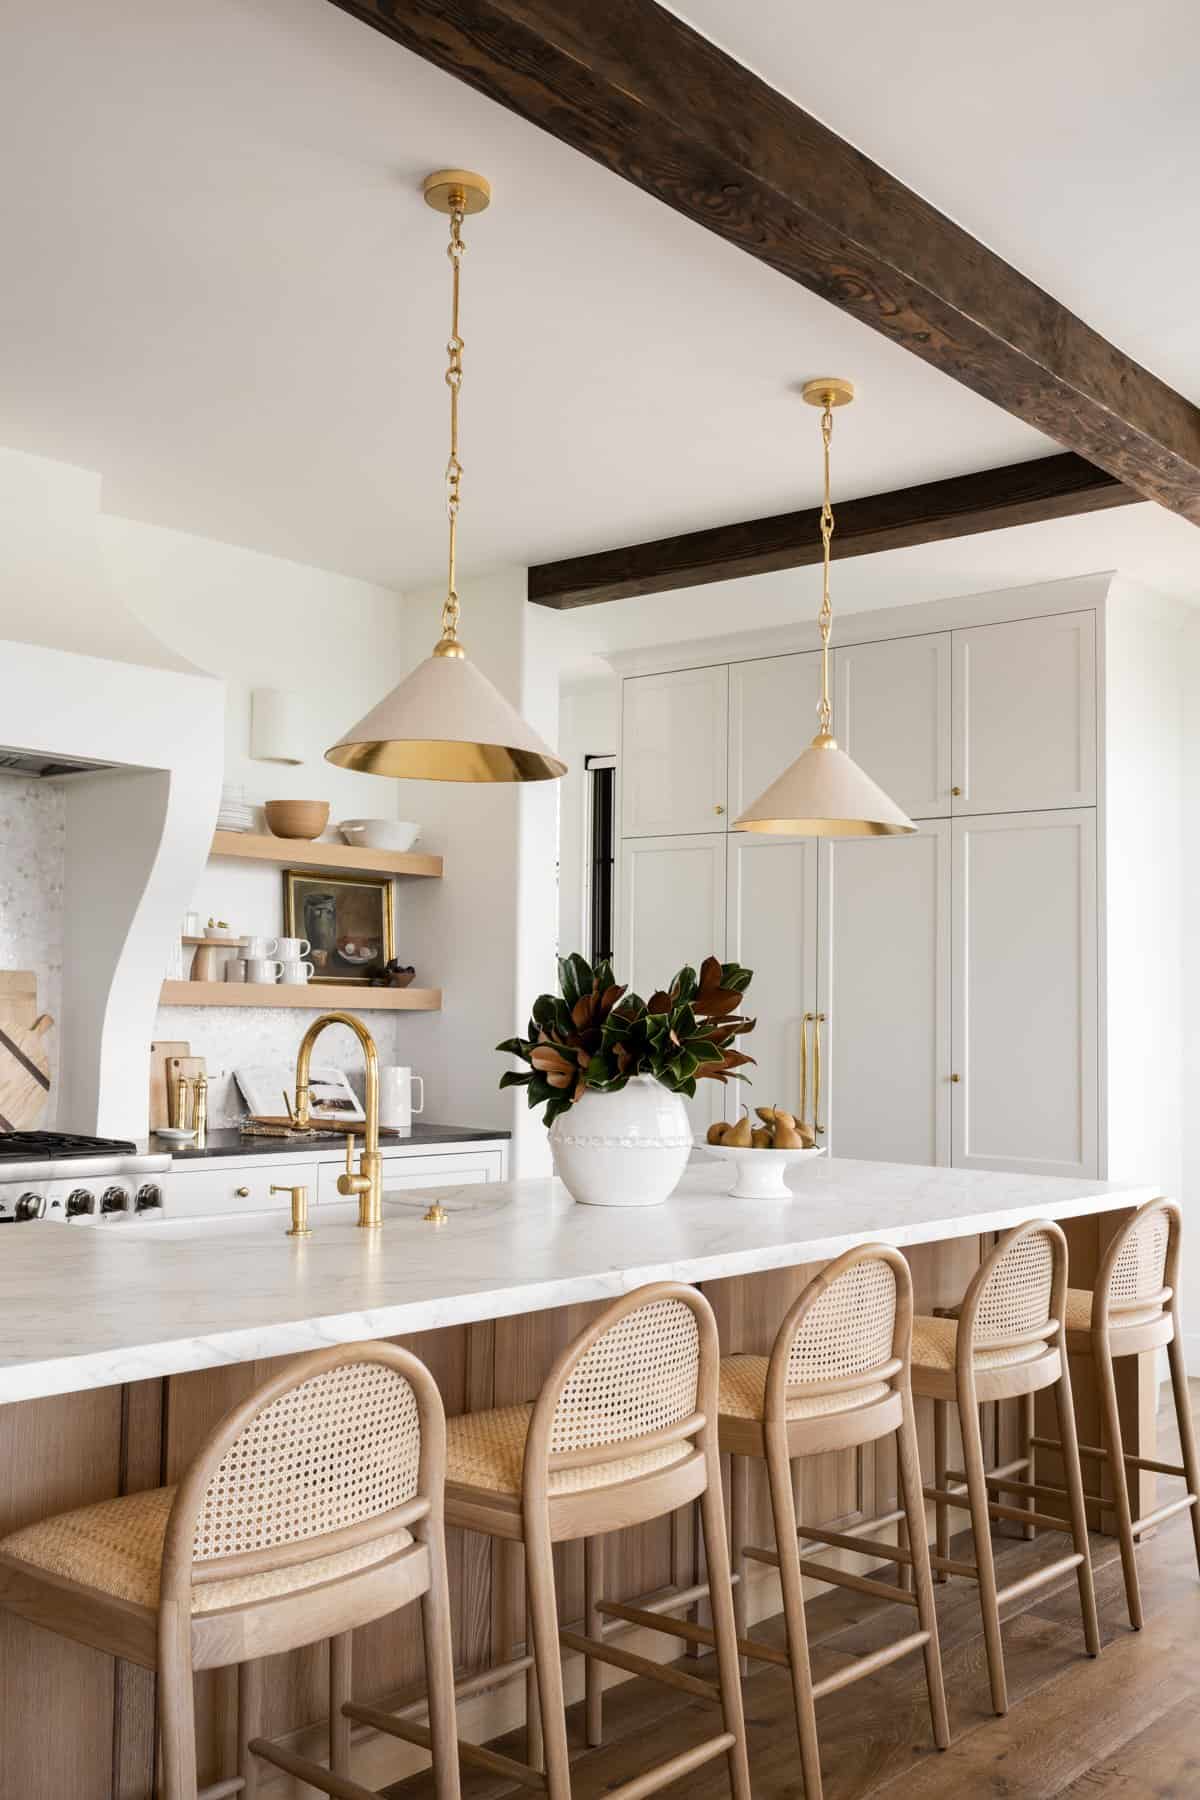 Neutral kitchen with warm natural wood. White oak cabinets, black and white marble counters and brass pendant lighting. 